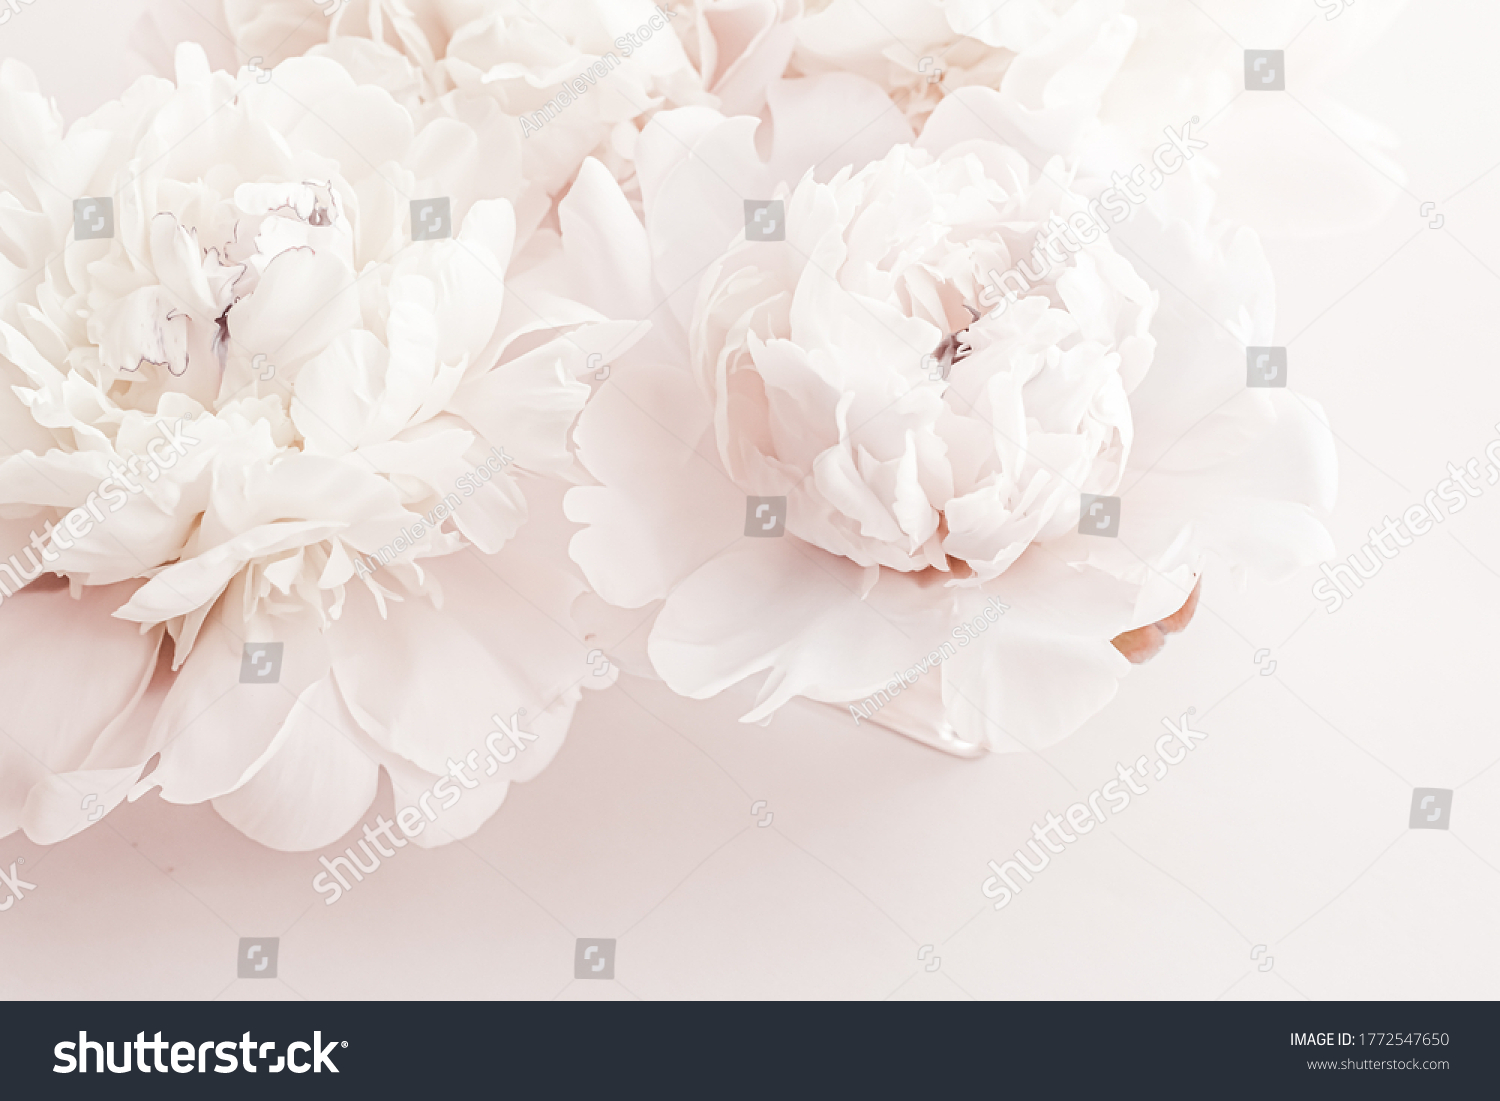 Pastel peony flowers in bloom as floral art background, wedding decor and luxury branding design #1772547650